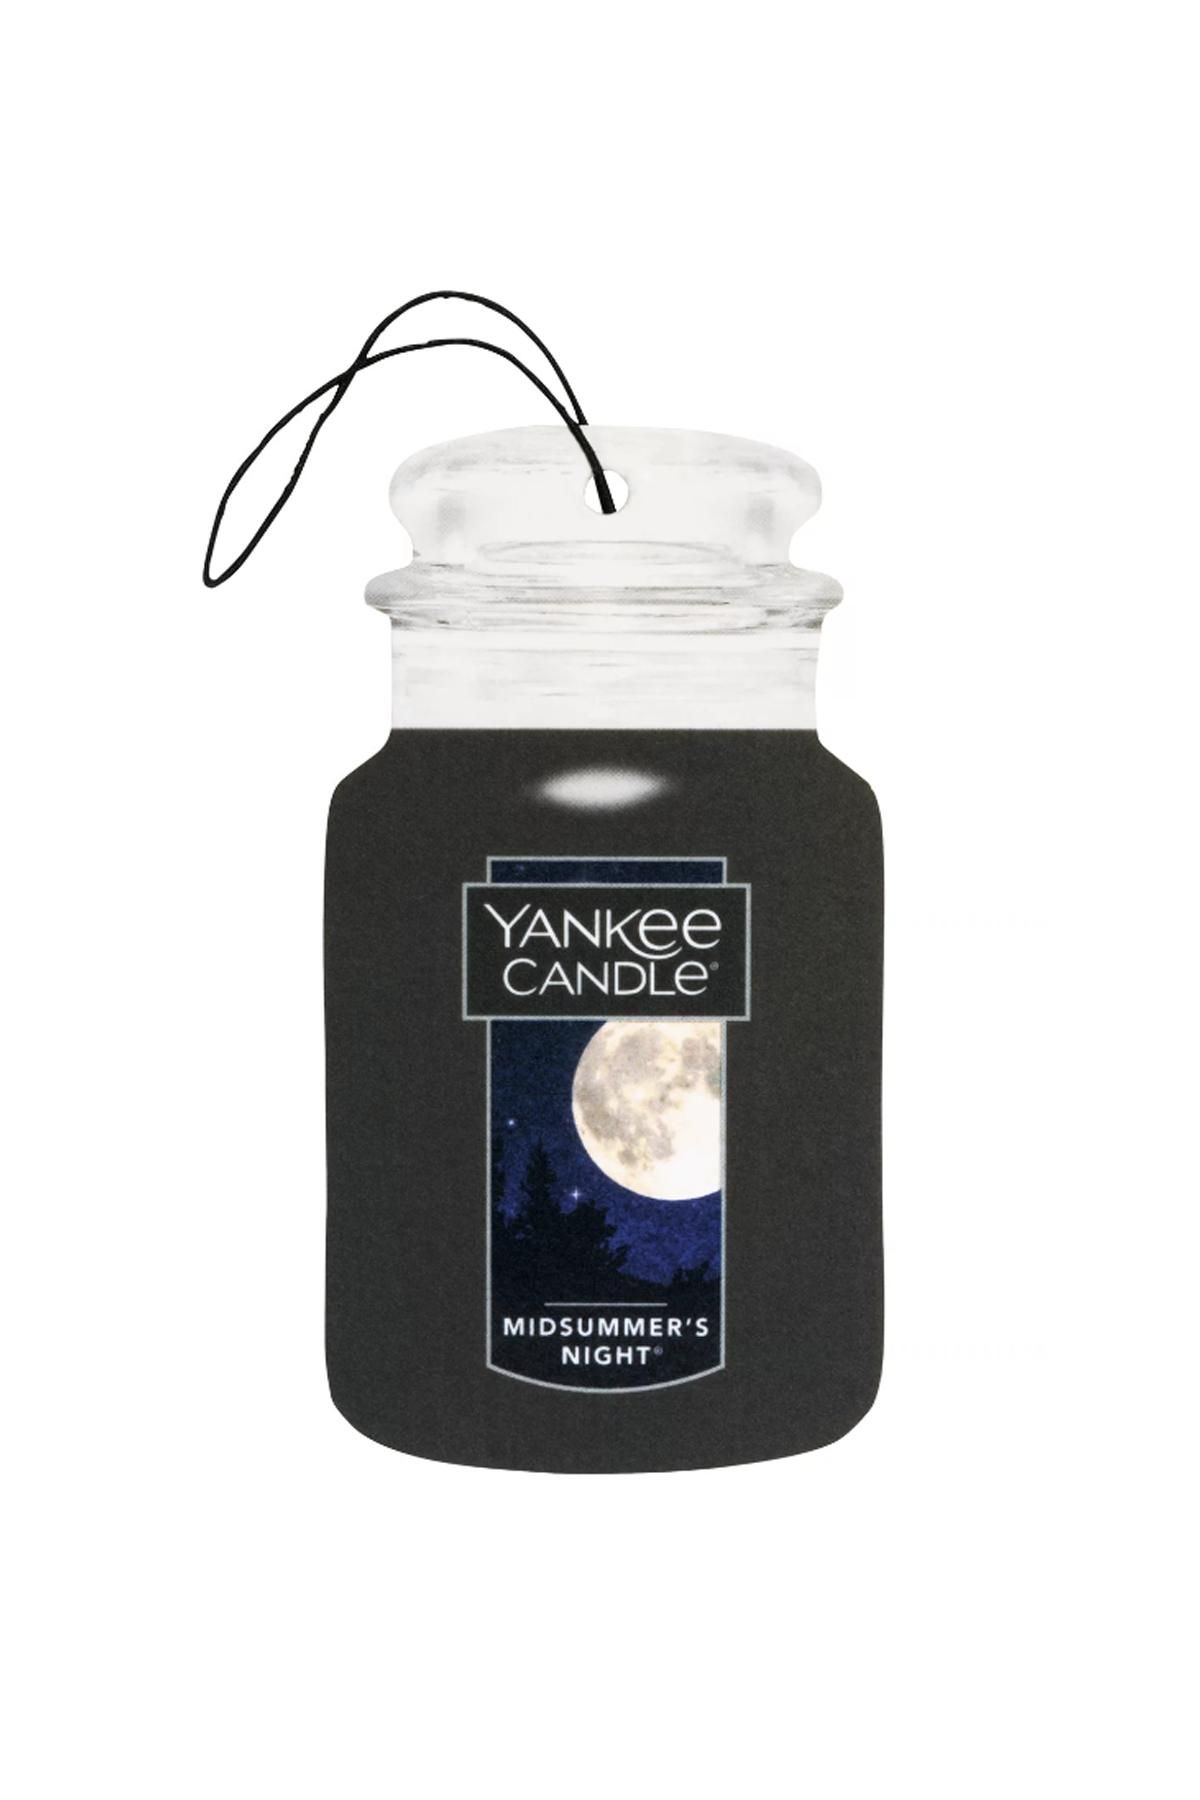 YANKEE CANDLE Midsummer Night Candles